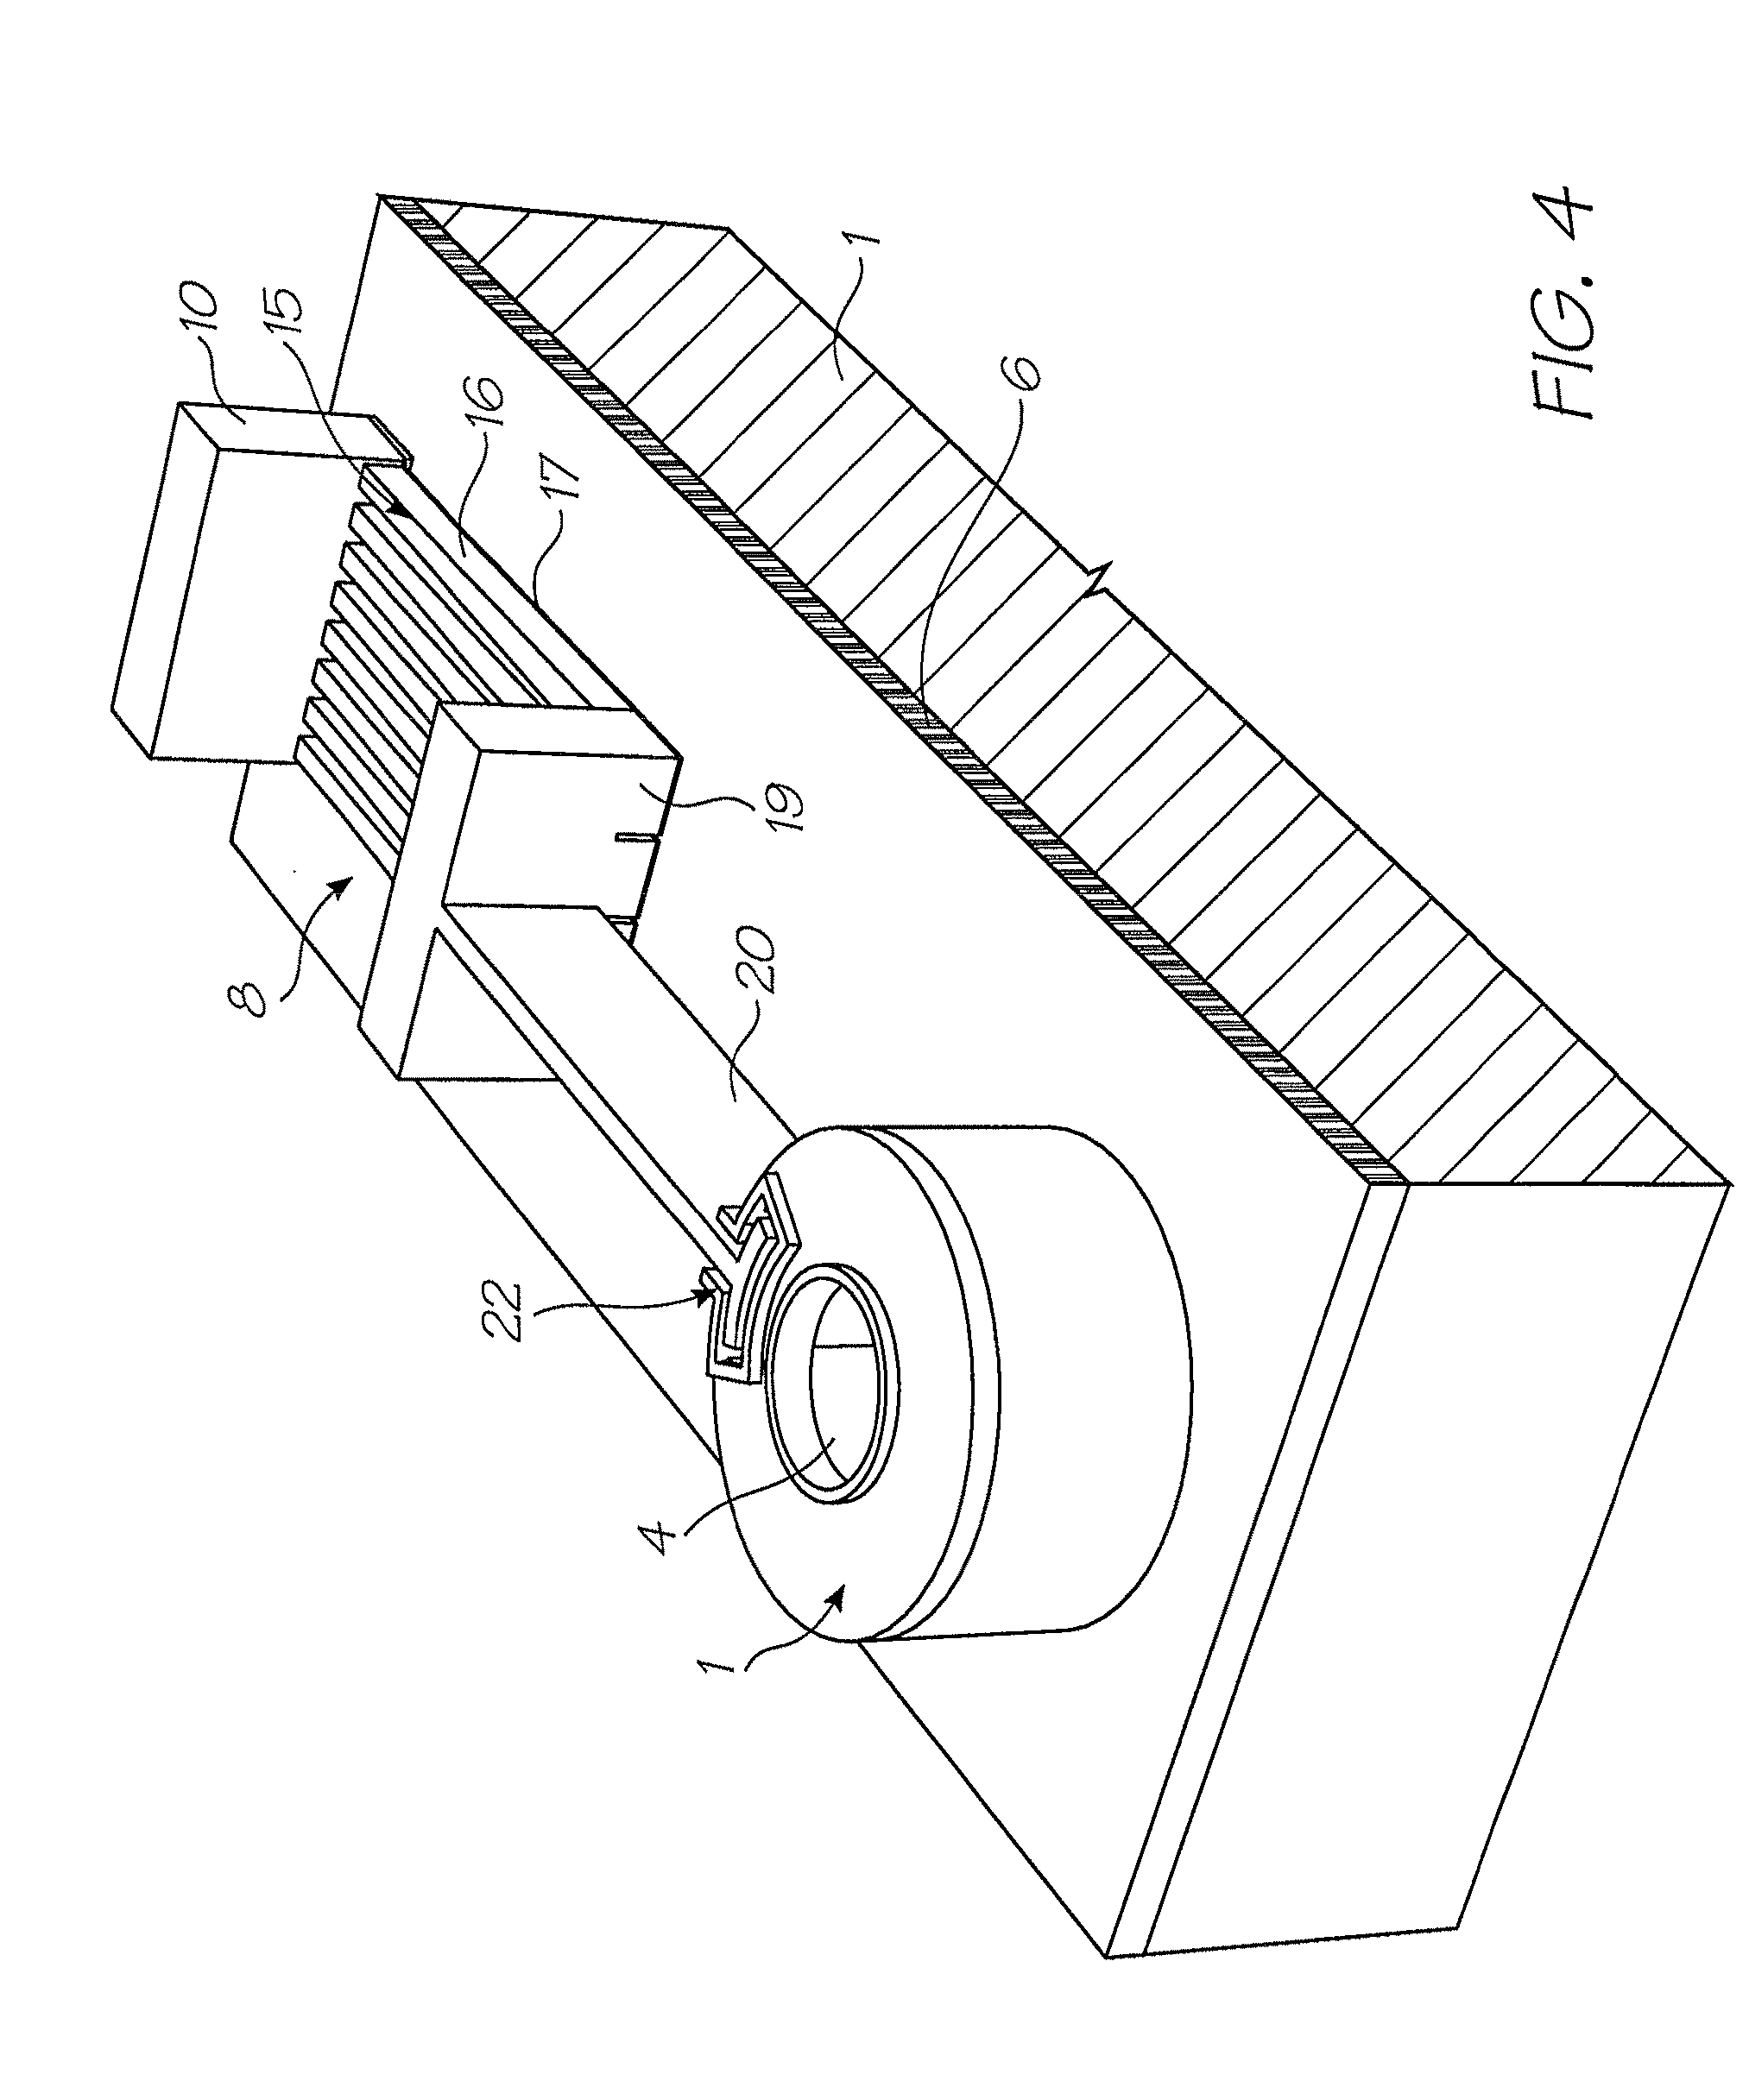 Printhead including a looped heater element